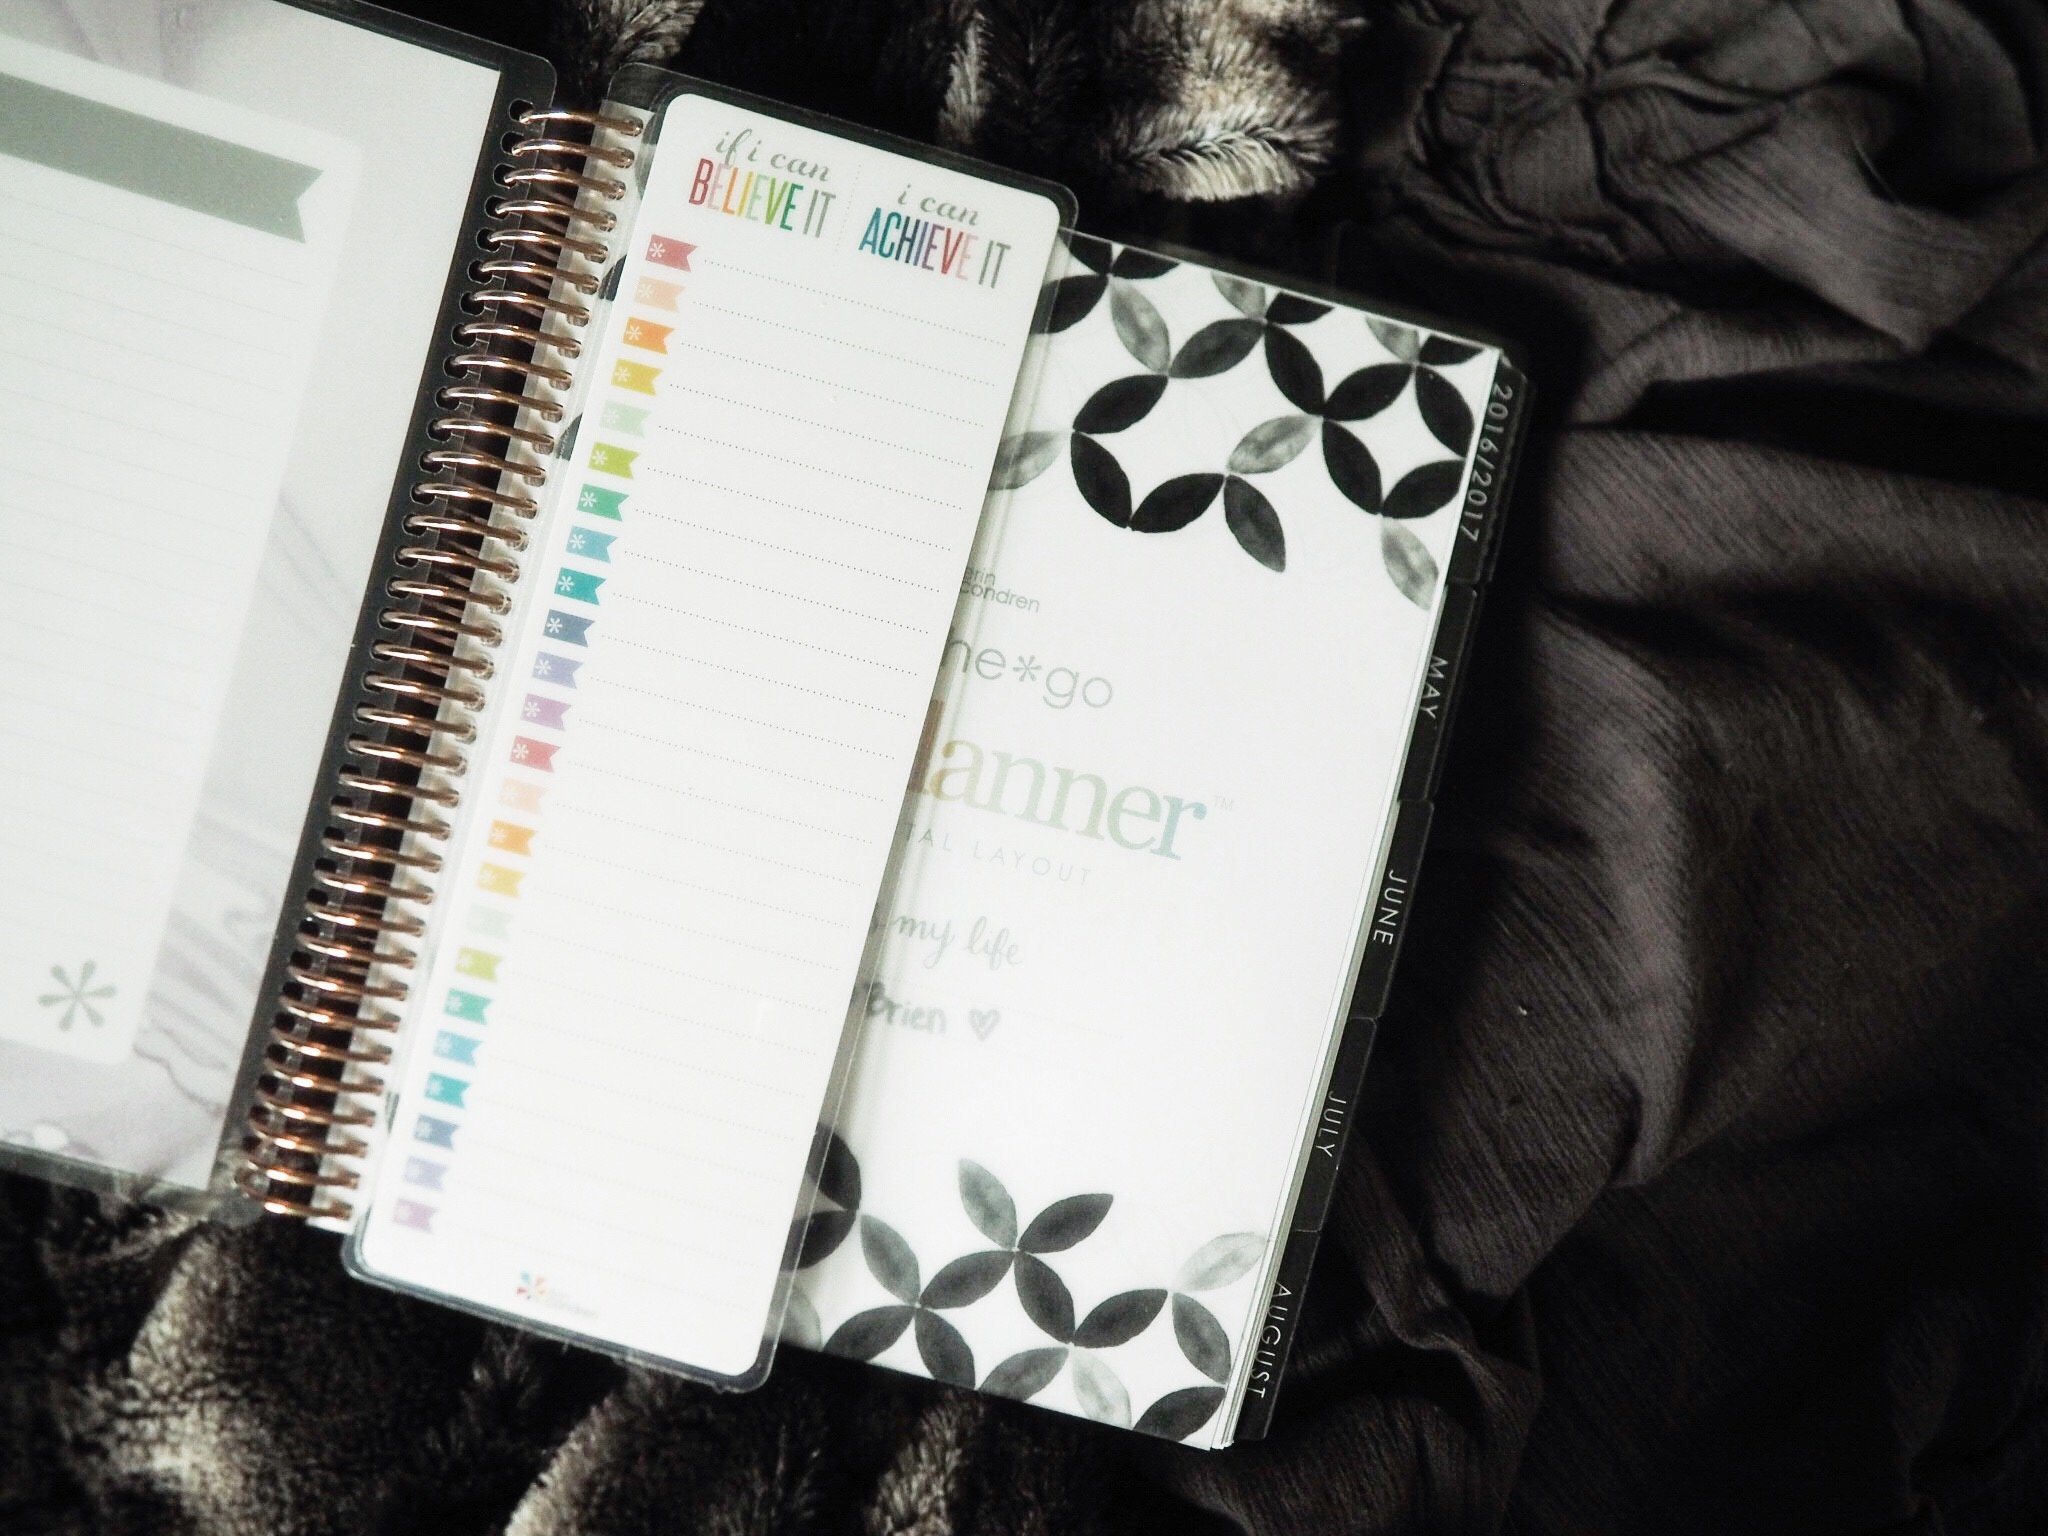 Use the Erin Condren Planner to organize your life!